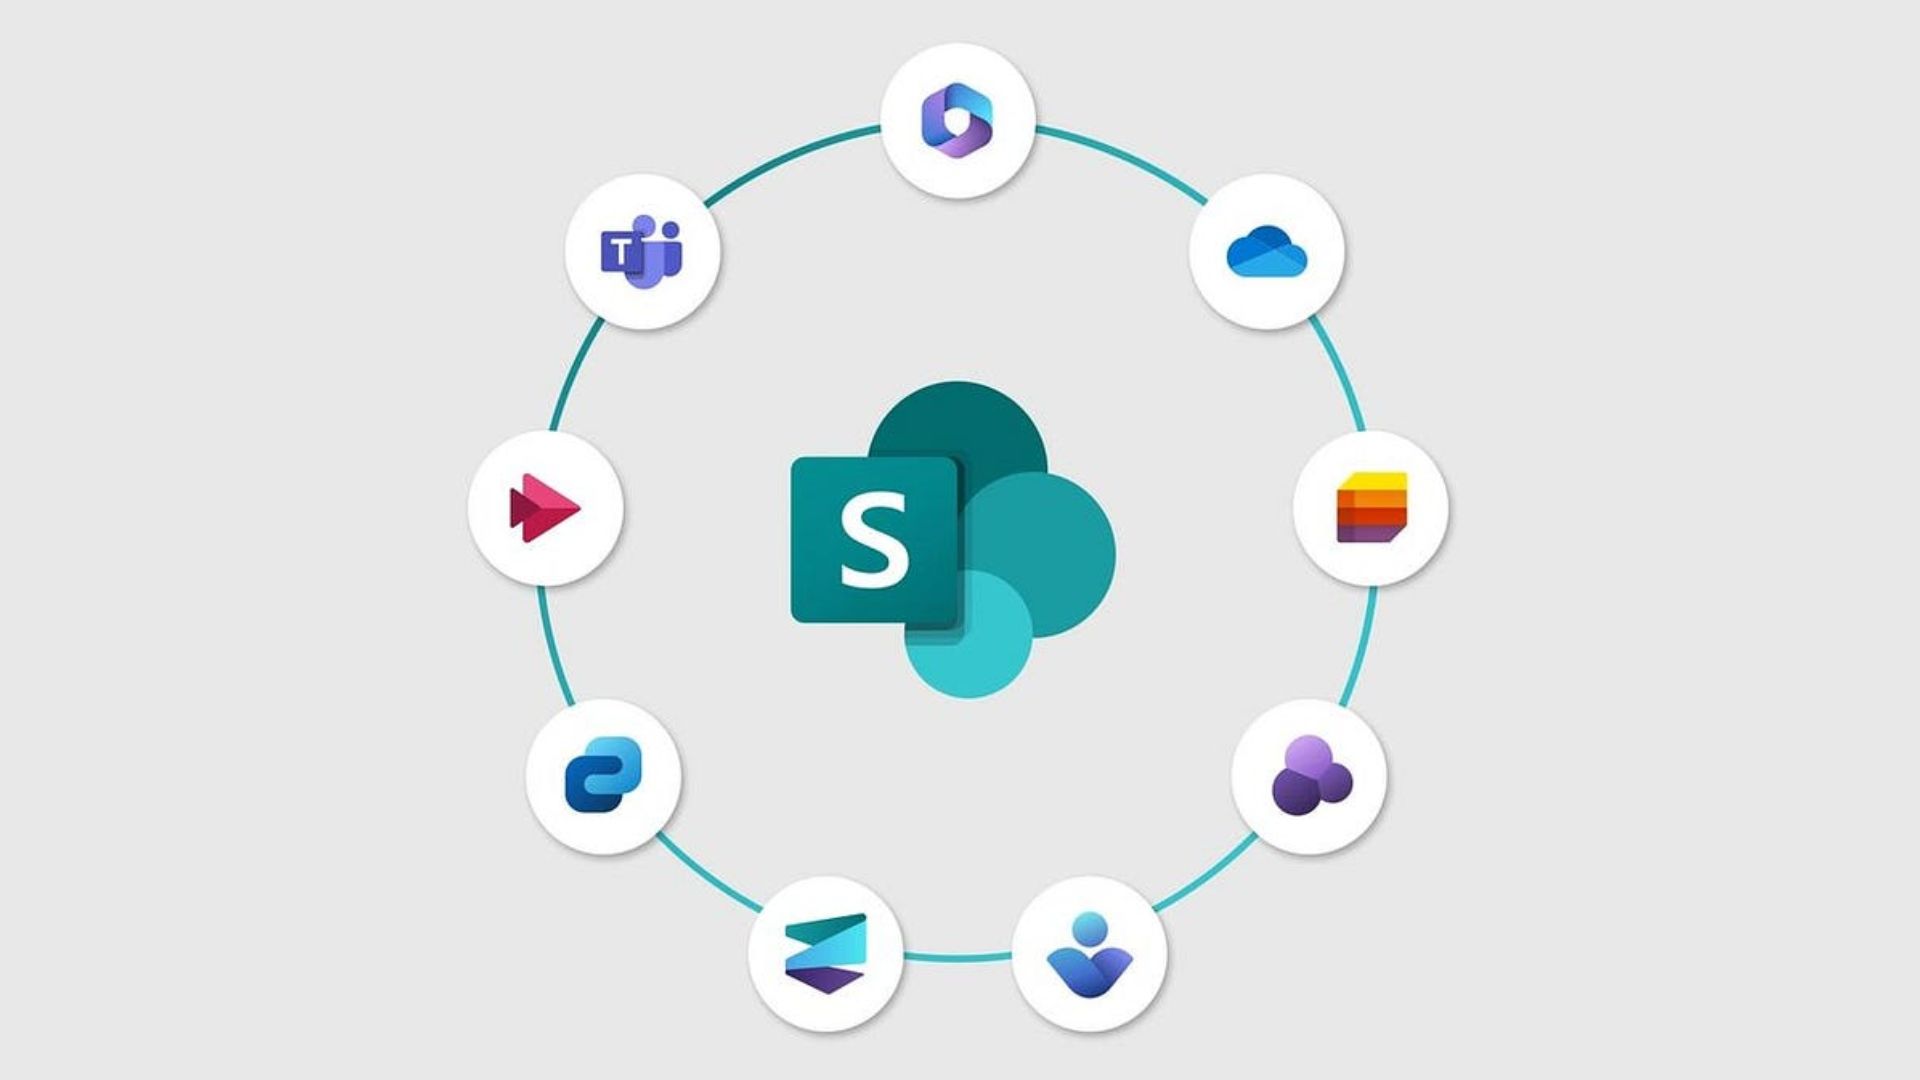 What Will SharePoint Premium Bring To The Digital Workplace?